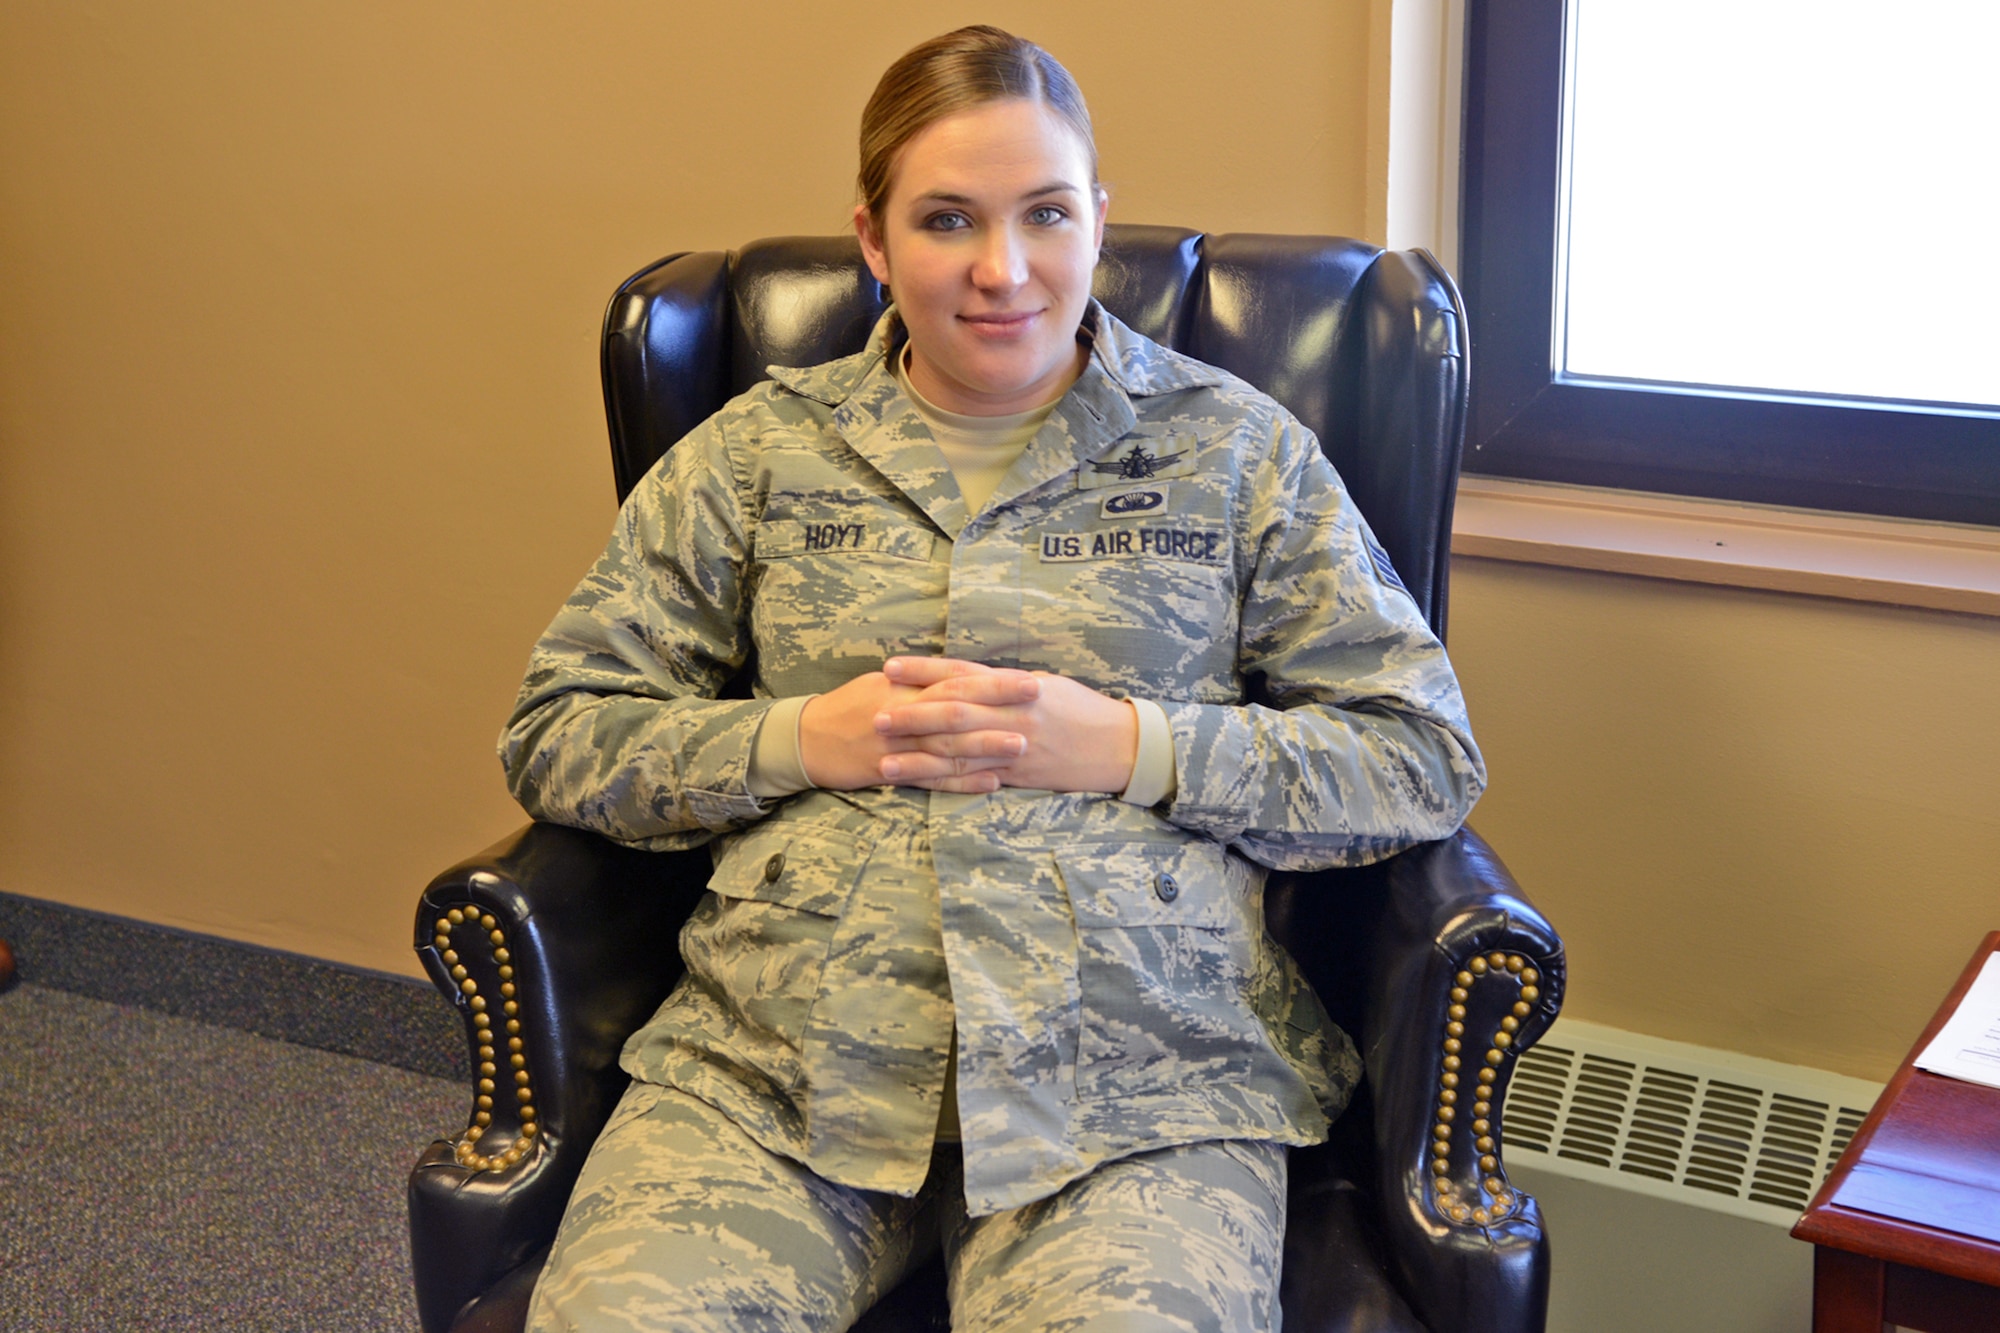 Staff Sgt. Grace Hoyt, 341st Missile Wing chaplain assistant, poses for a photo Nov. 7, 2017, at Malmstrom Air Force Base, Mont.